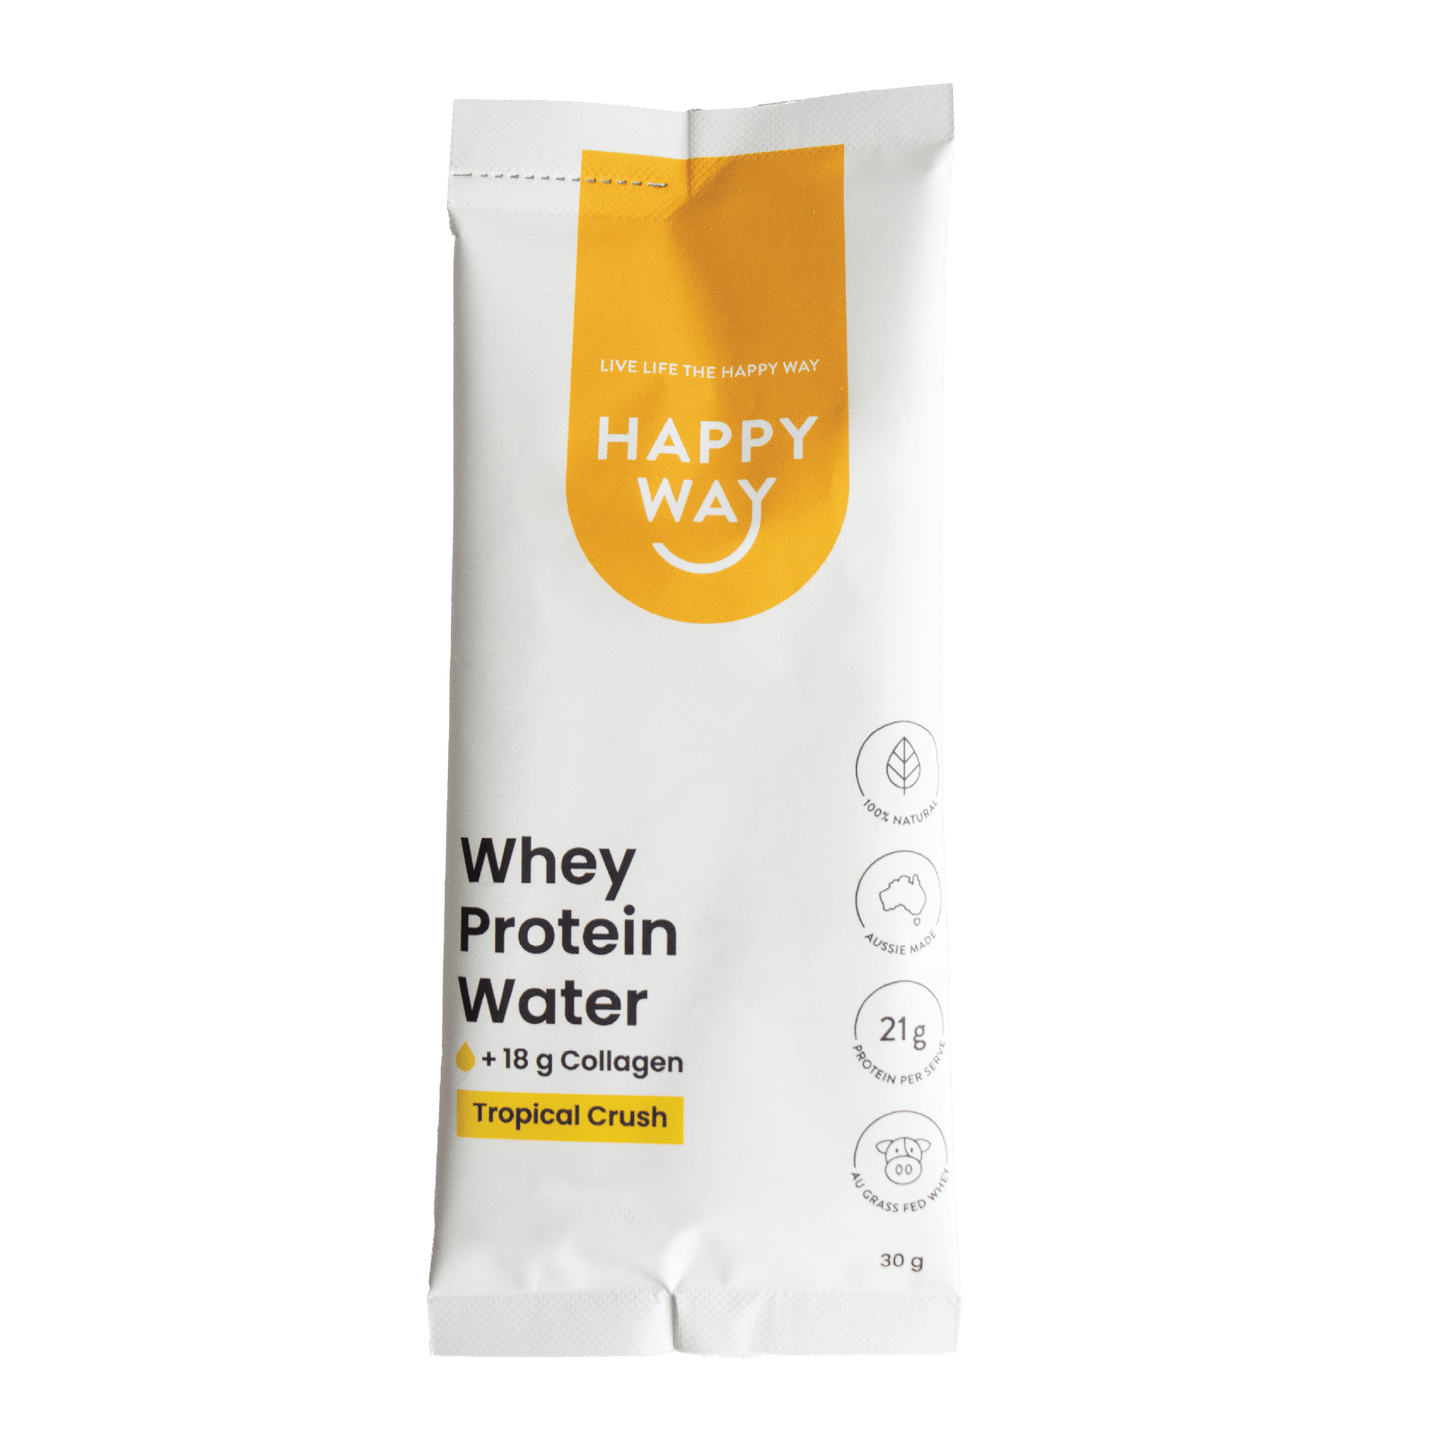 Whey Protein Water Powder Sample Pack 30g